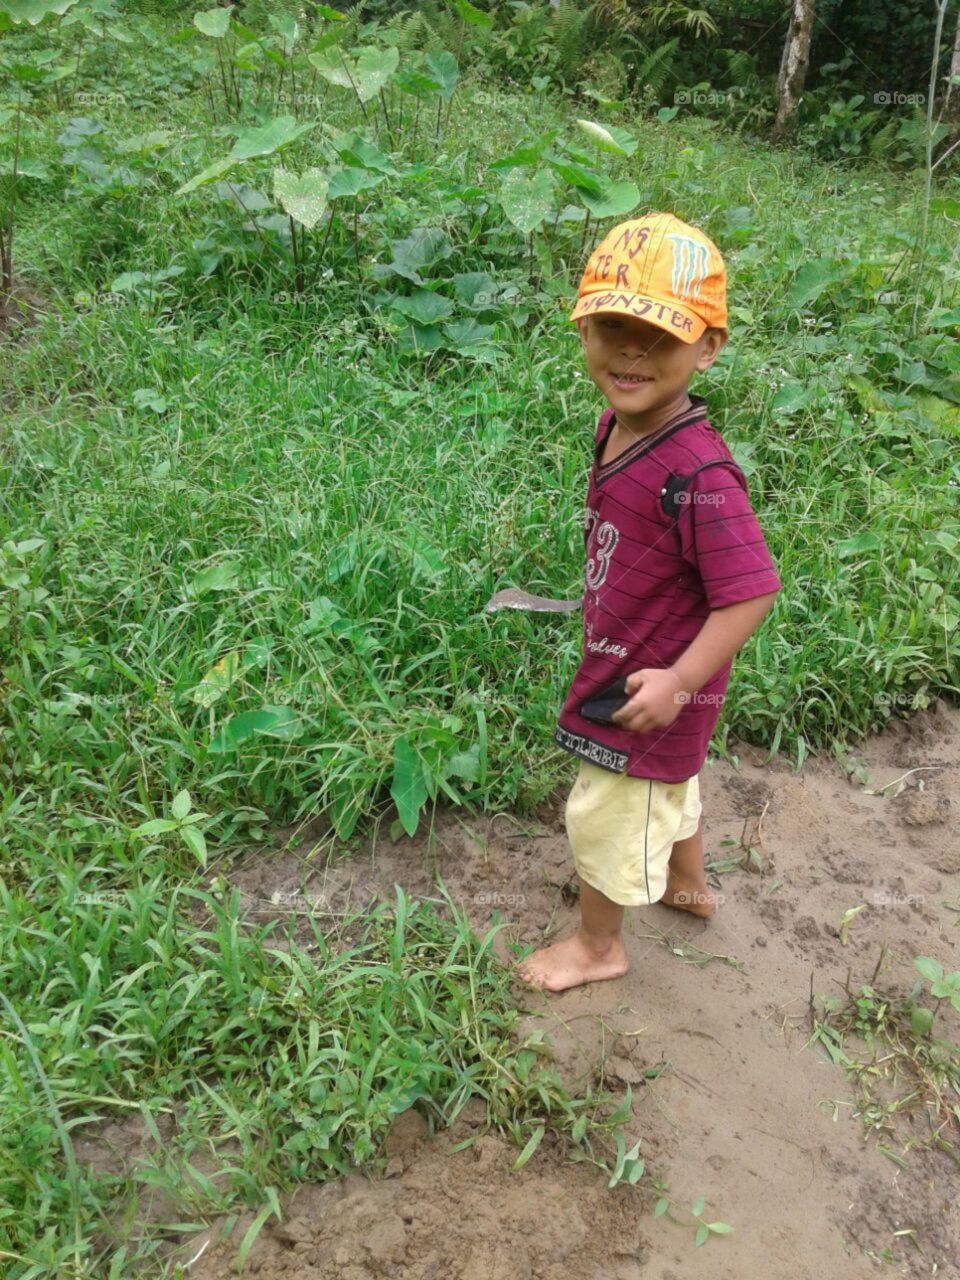 This child name PROBAL. He alwayes like to play and nice joker. 3 Years lovely child.